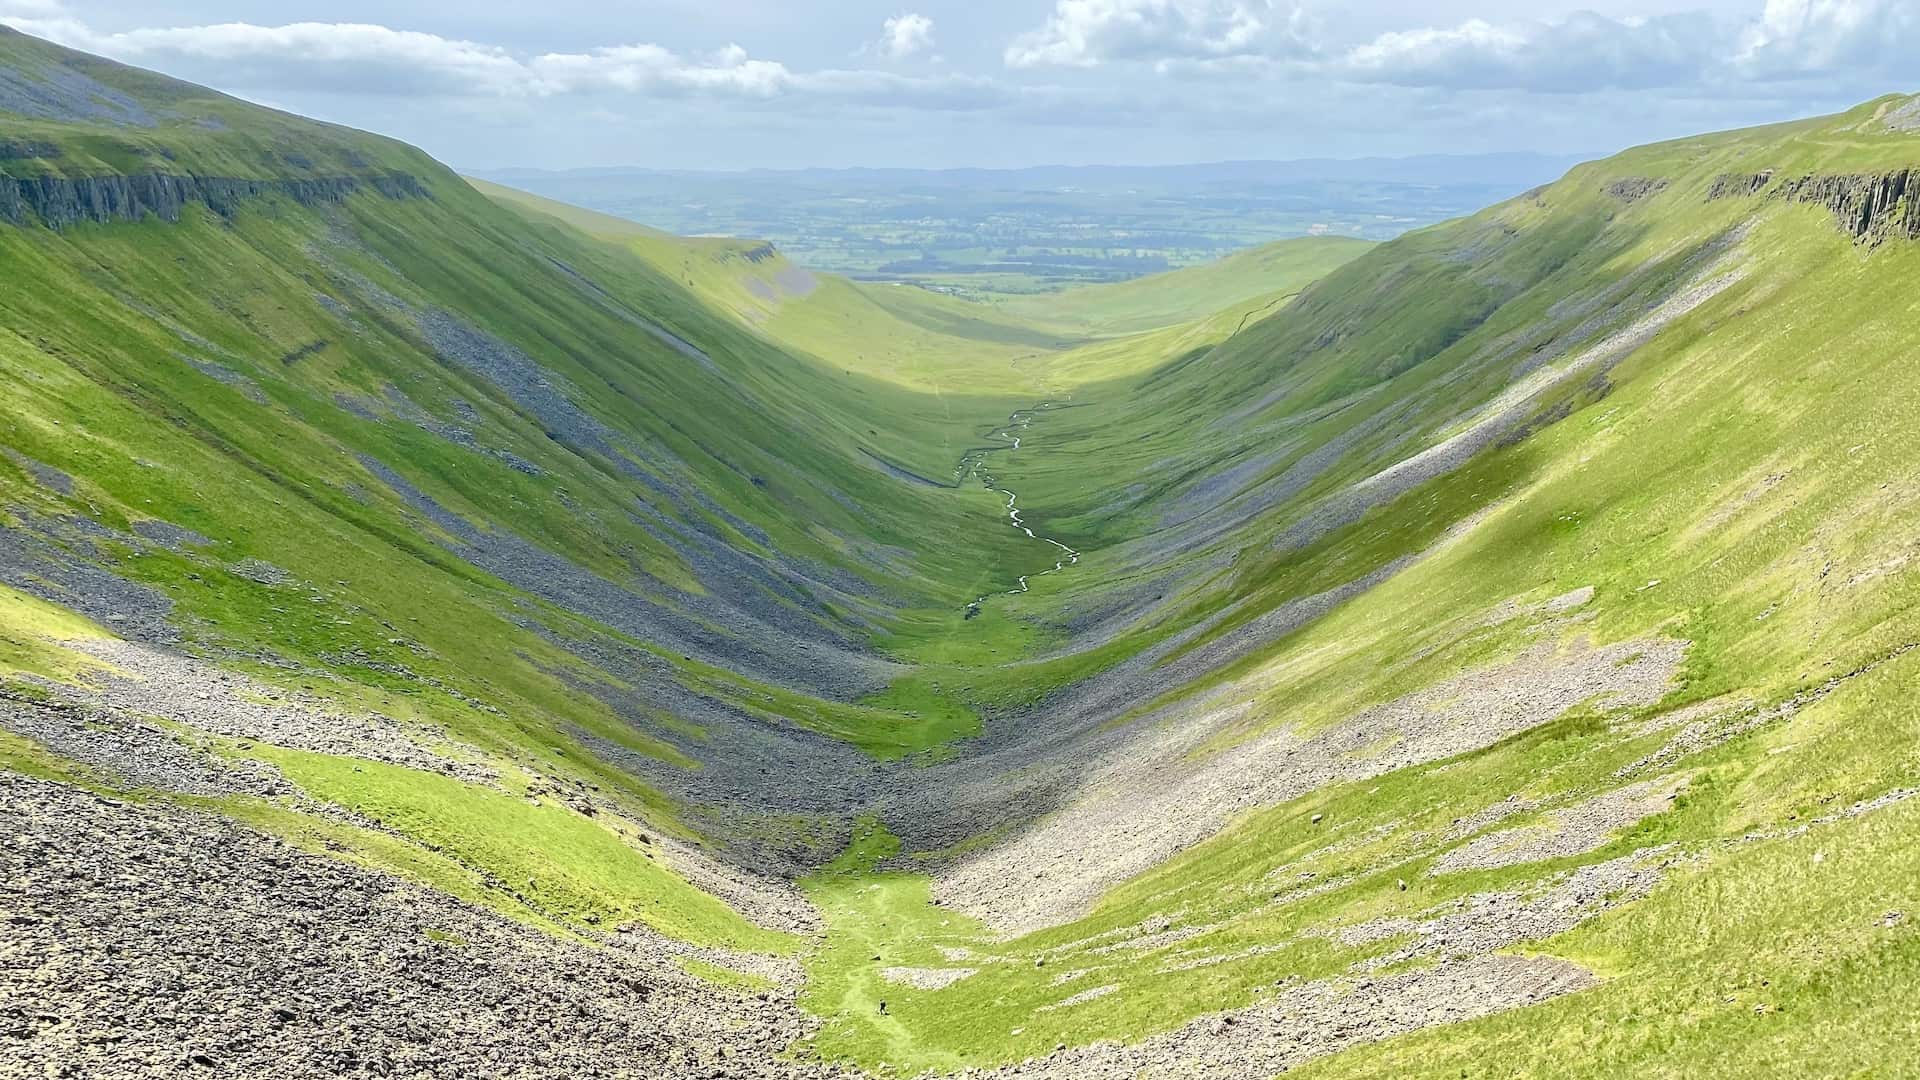 The North Pennines Area of Outstanding Natural Beauty (AONB) is one of the most remote and unspoilt places in England. It lies between the national parks of the Yorkshire Dales and Northumberland and at almost 770 square miles is the second largest AONB in the United Kingdom.